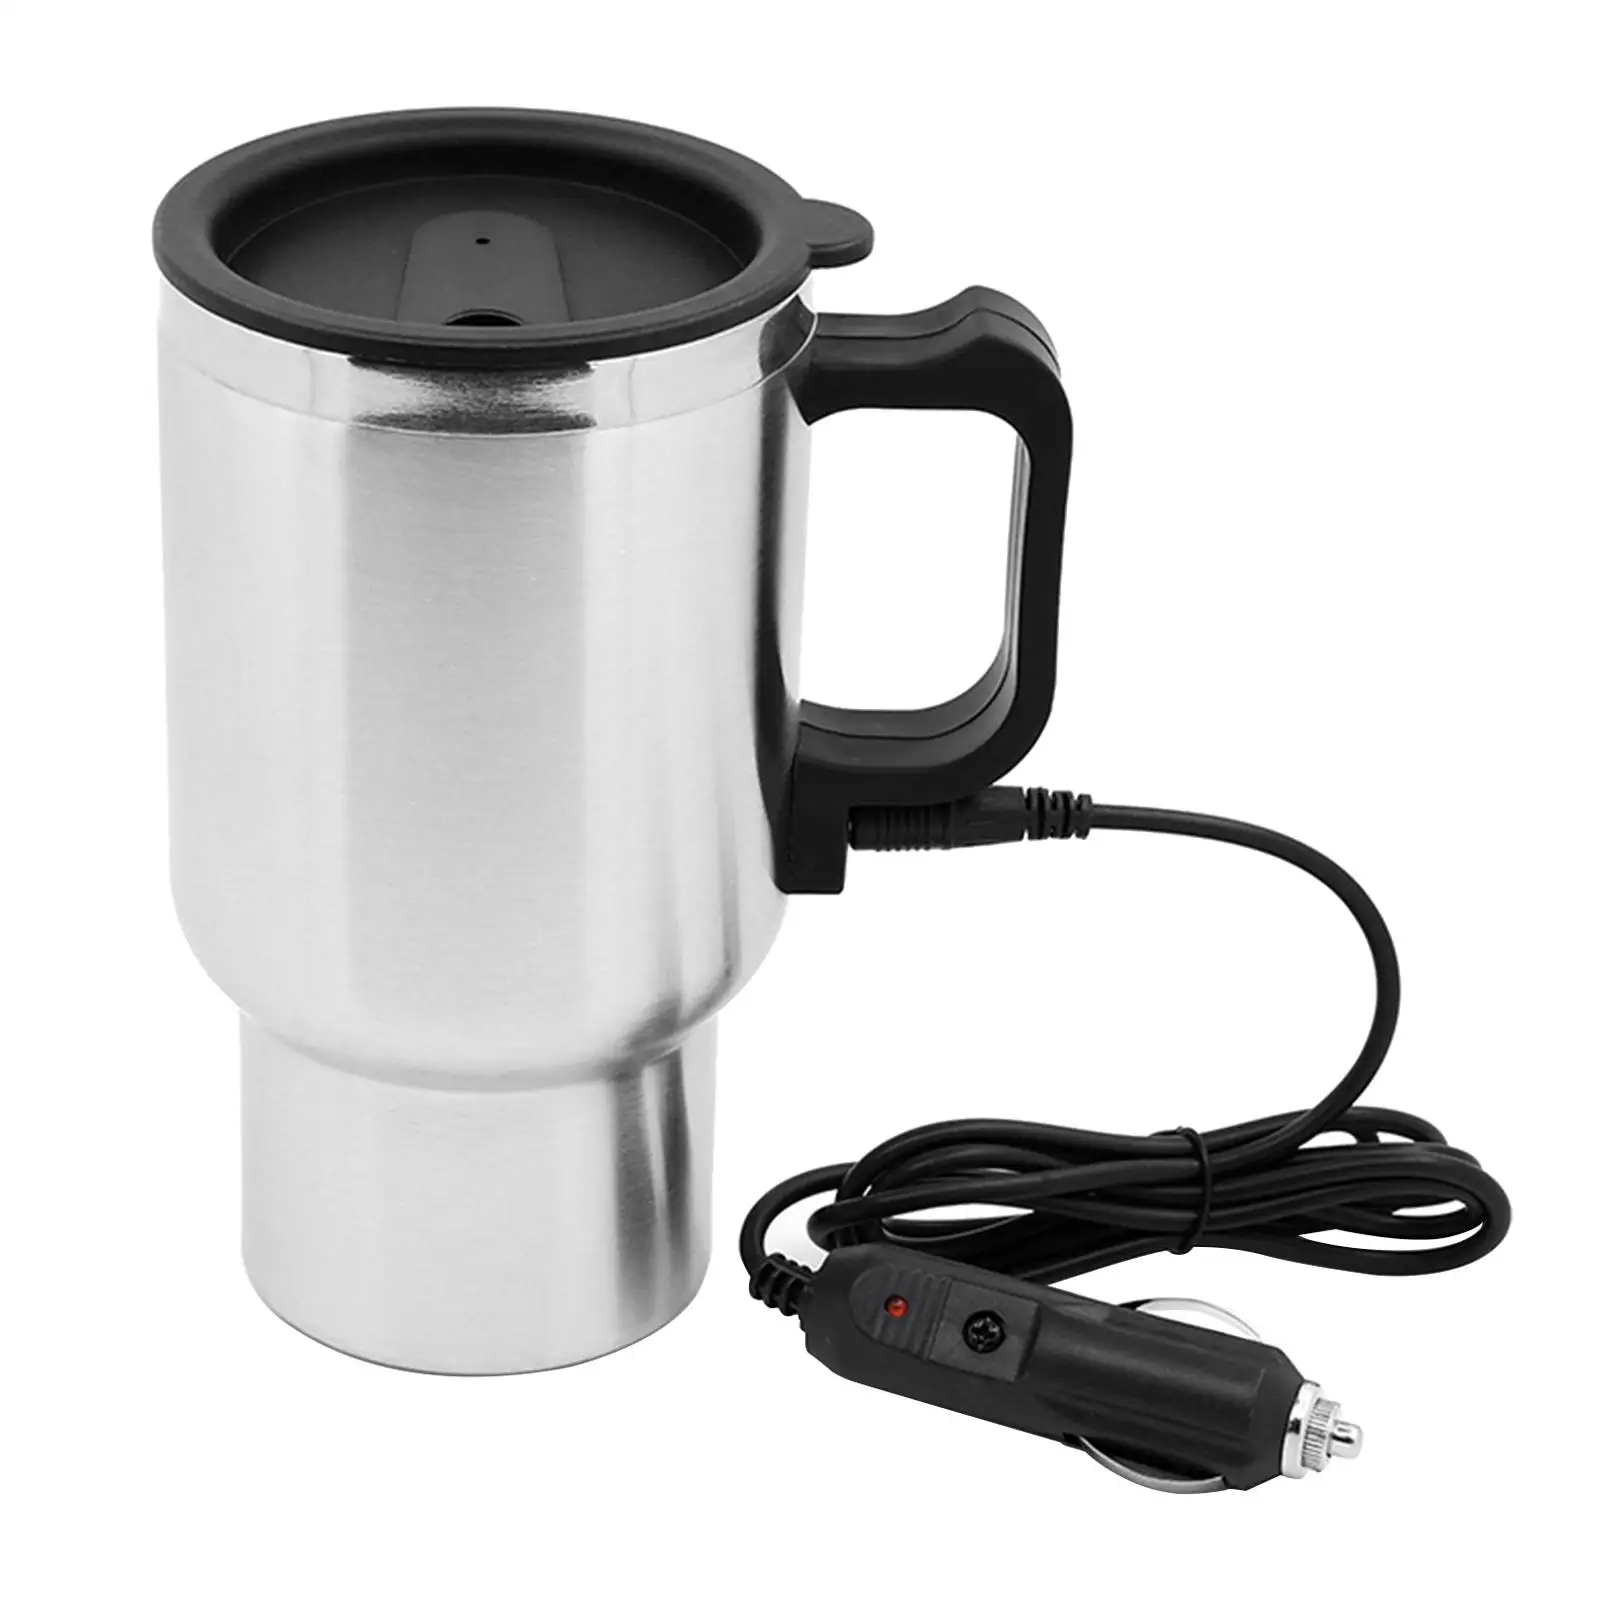 12V Car Heating Cup Stainless Steel Coffee Cup Insulated Heated Mug,500ml Car Kettle for Heating Water, Coffee, Milk, Tea